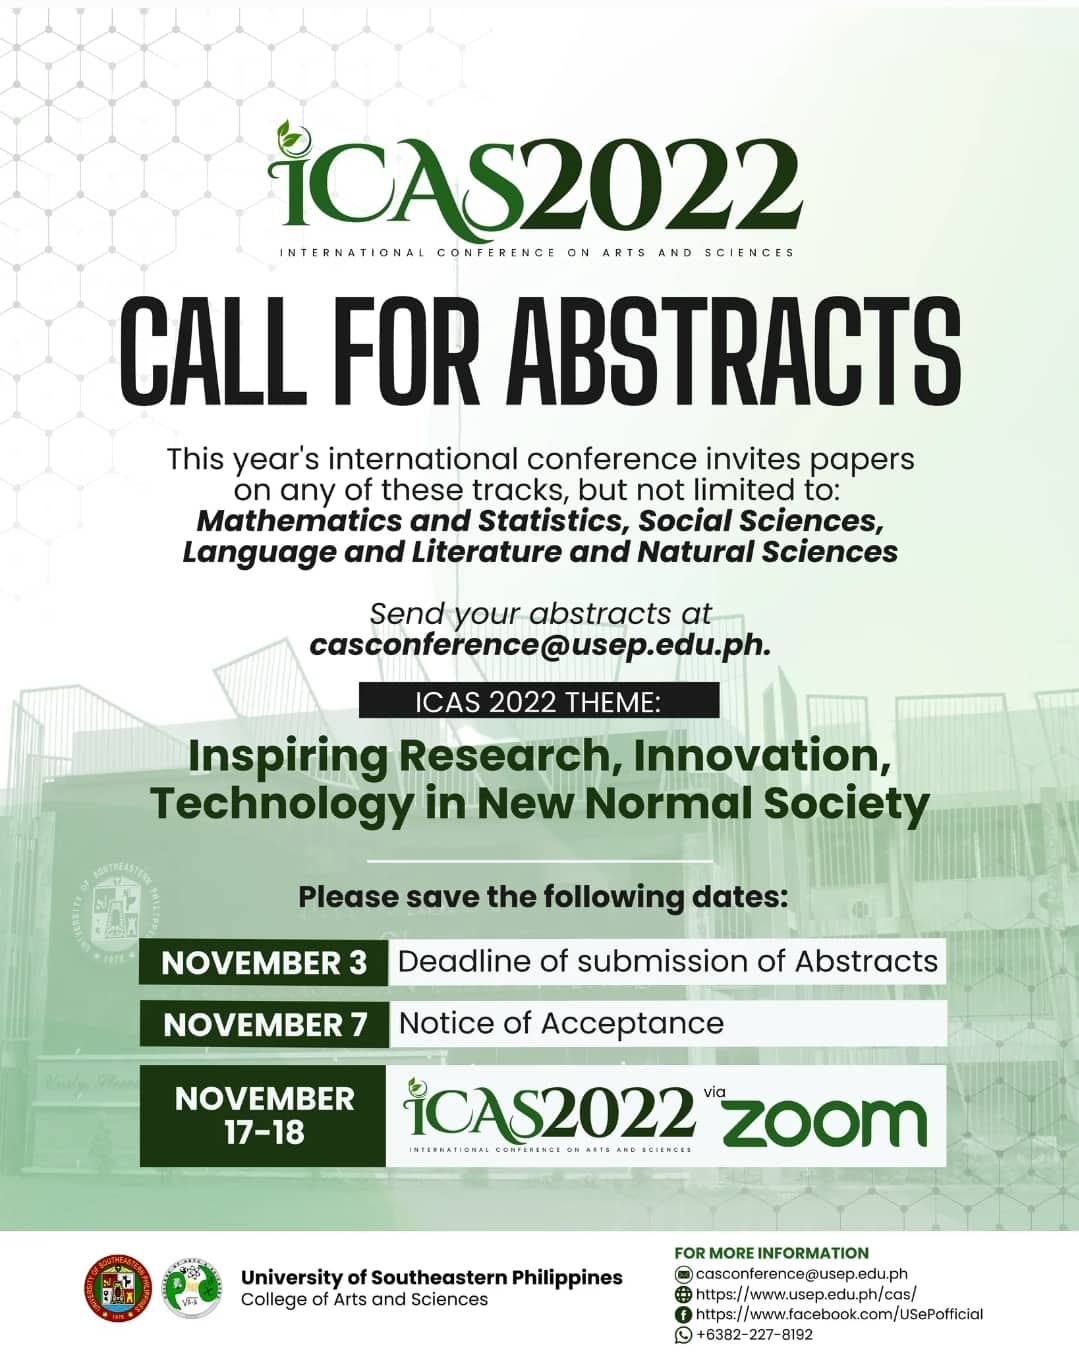 Call for Abstracts to the 2022 International Conference on Arts and Sciences